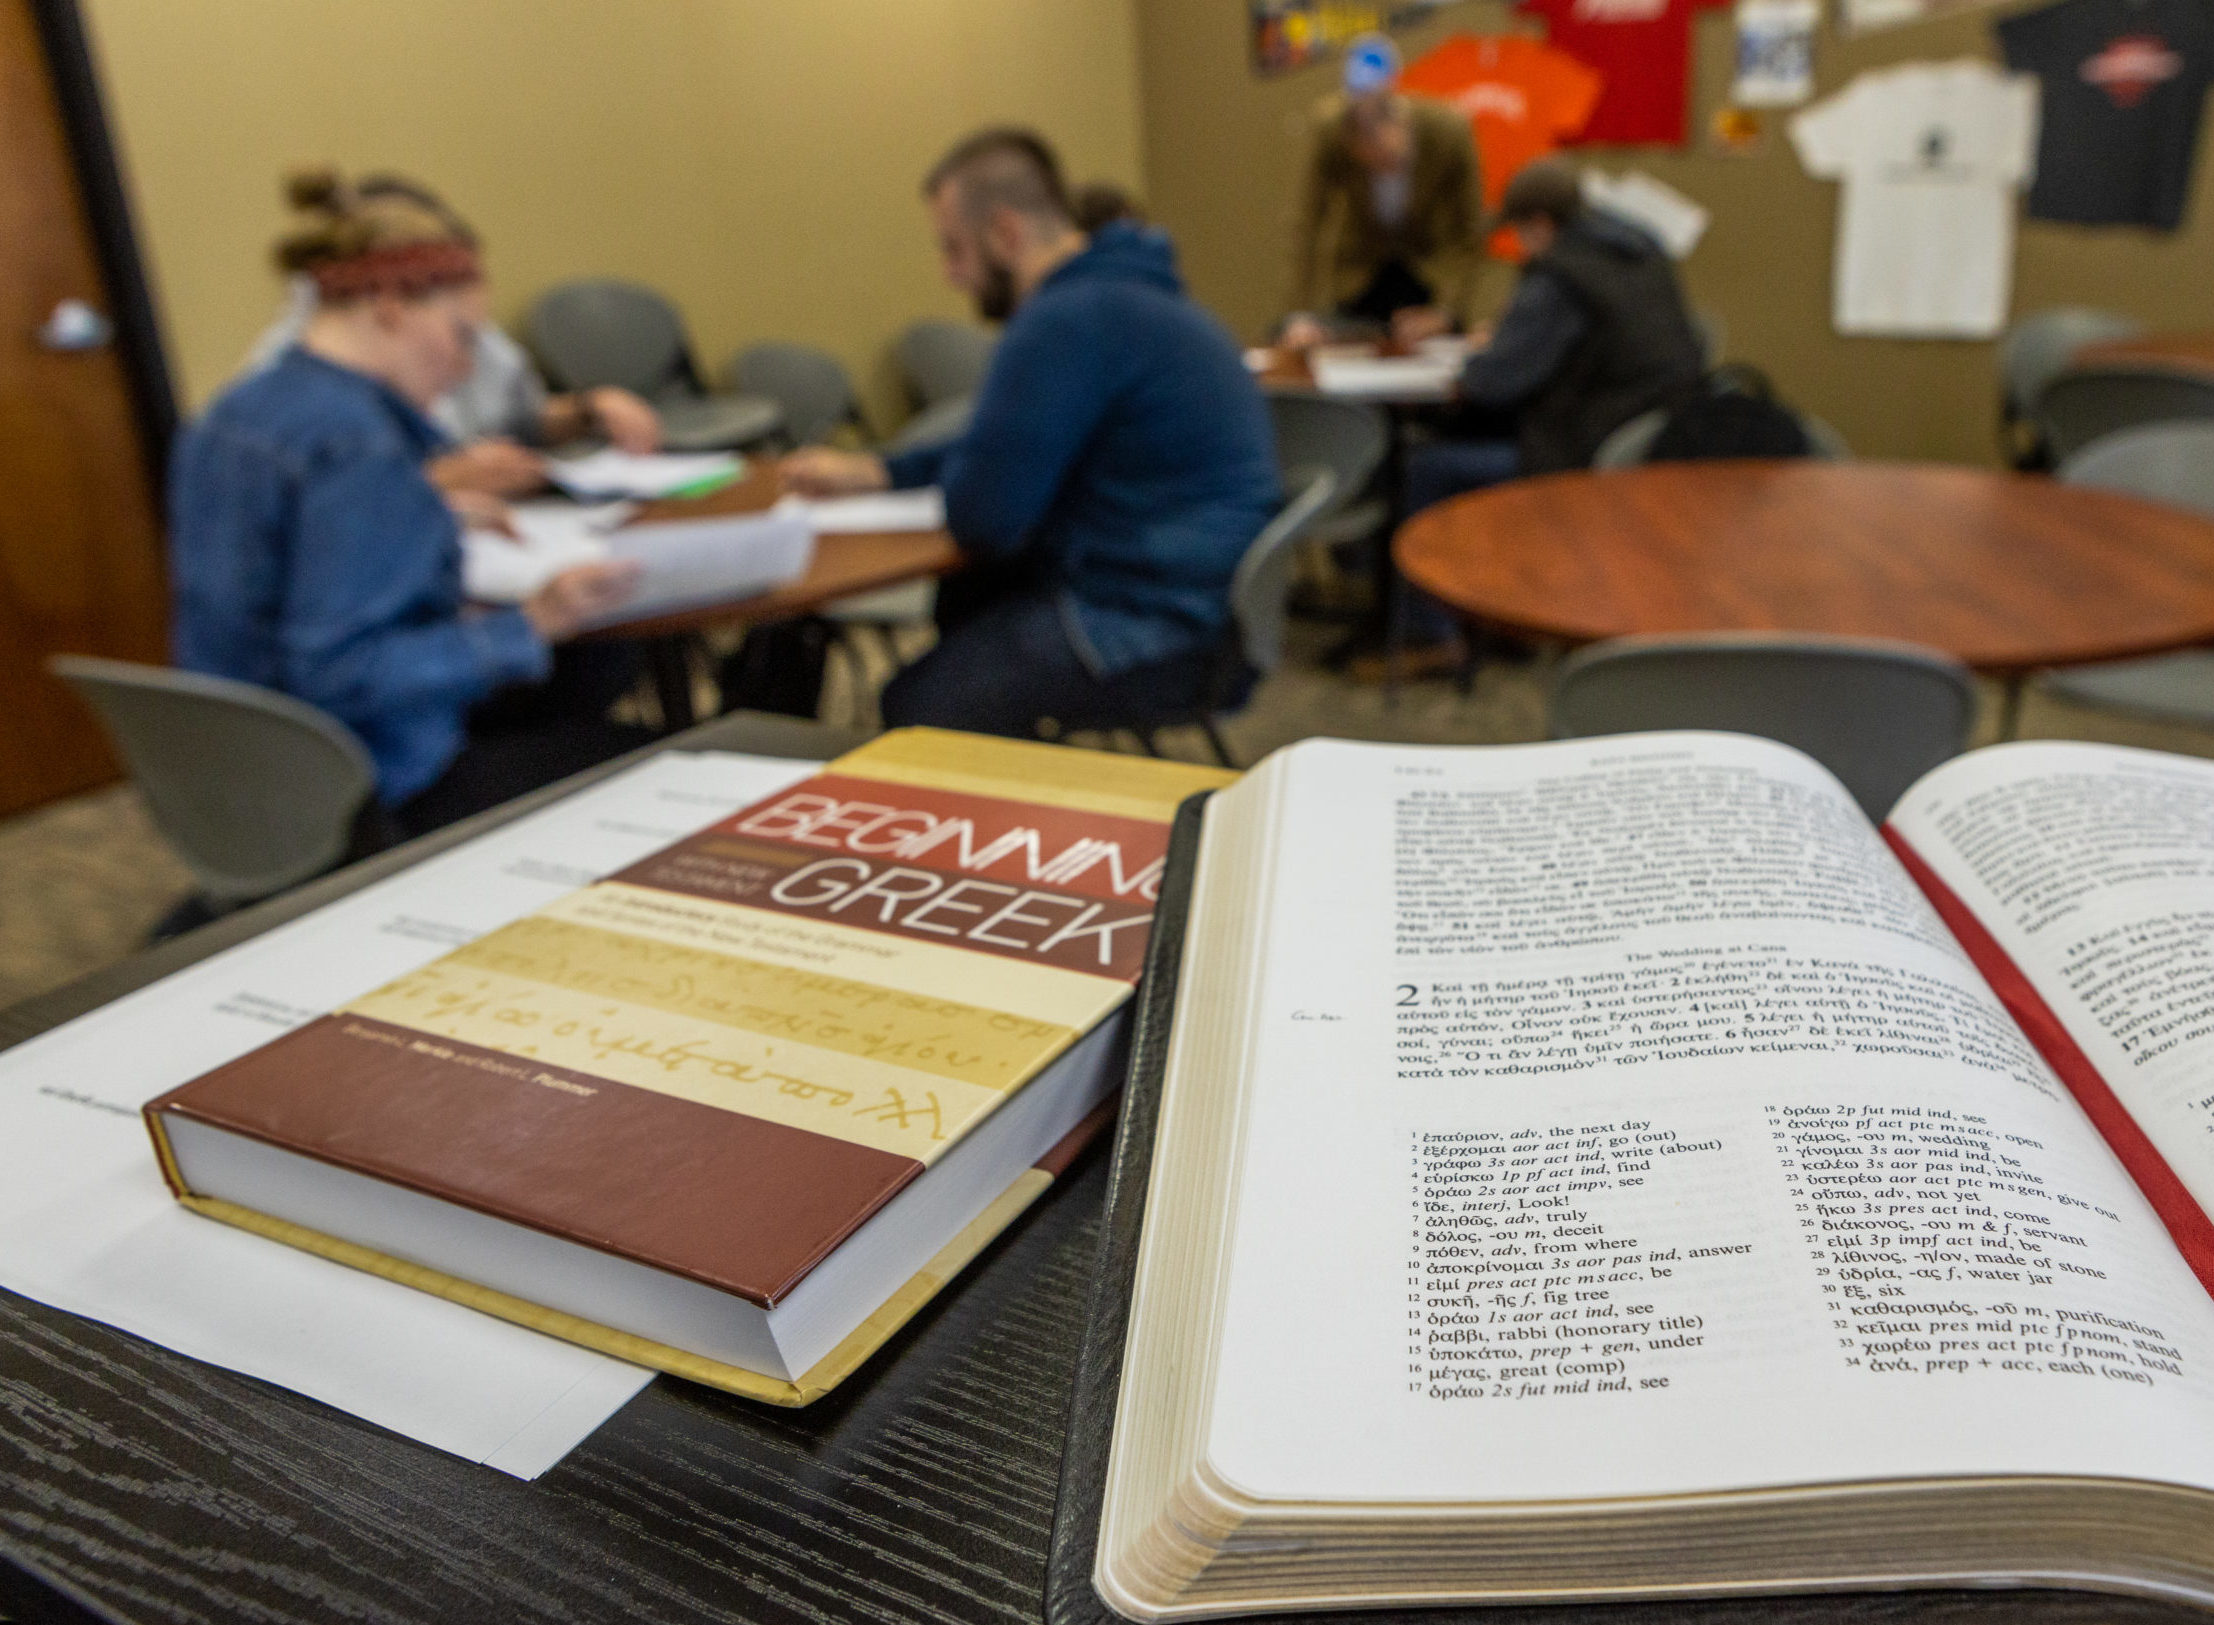 At Grace Seminary receive a fast theology degree, a bachelor’s and master’s degree in just four or five years, saving you time and money.